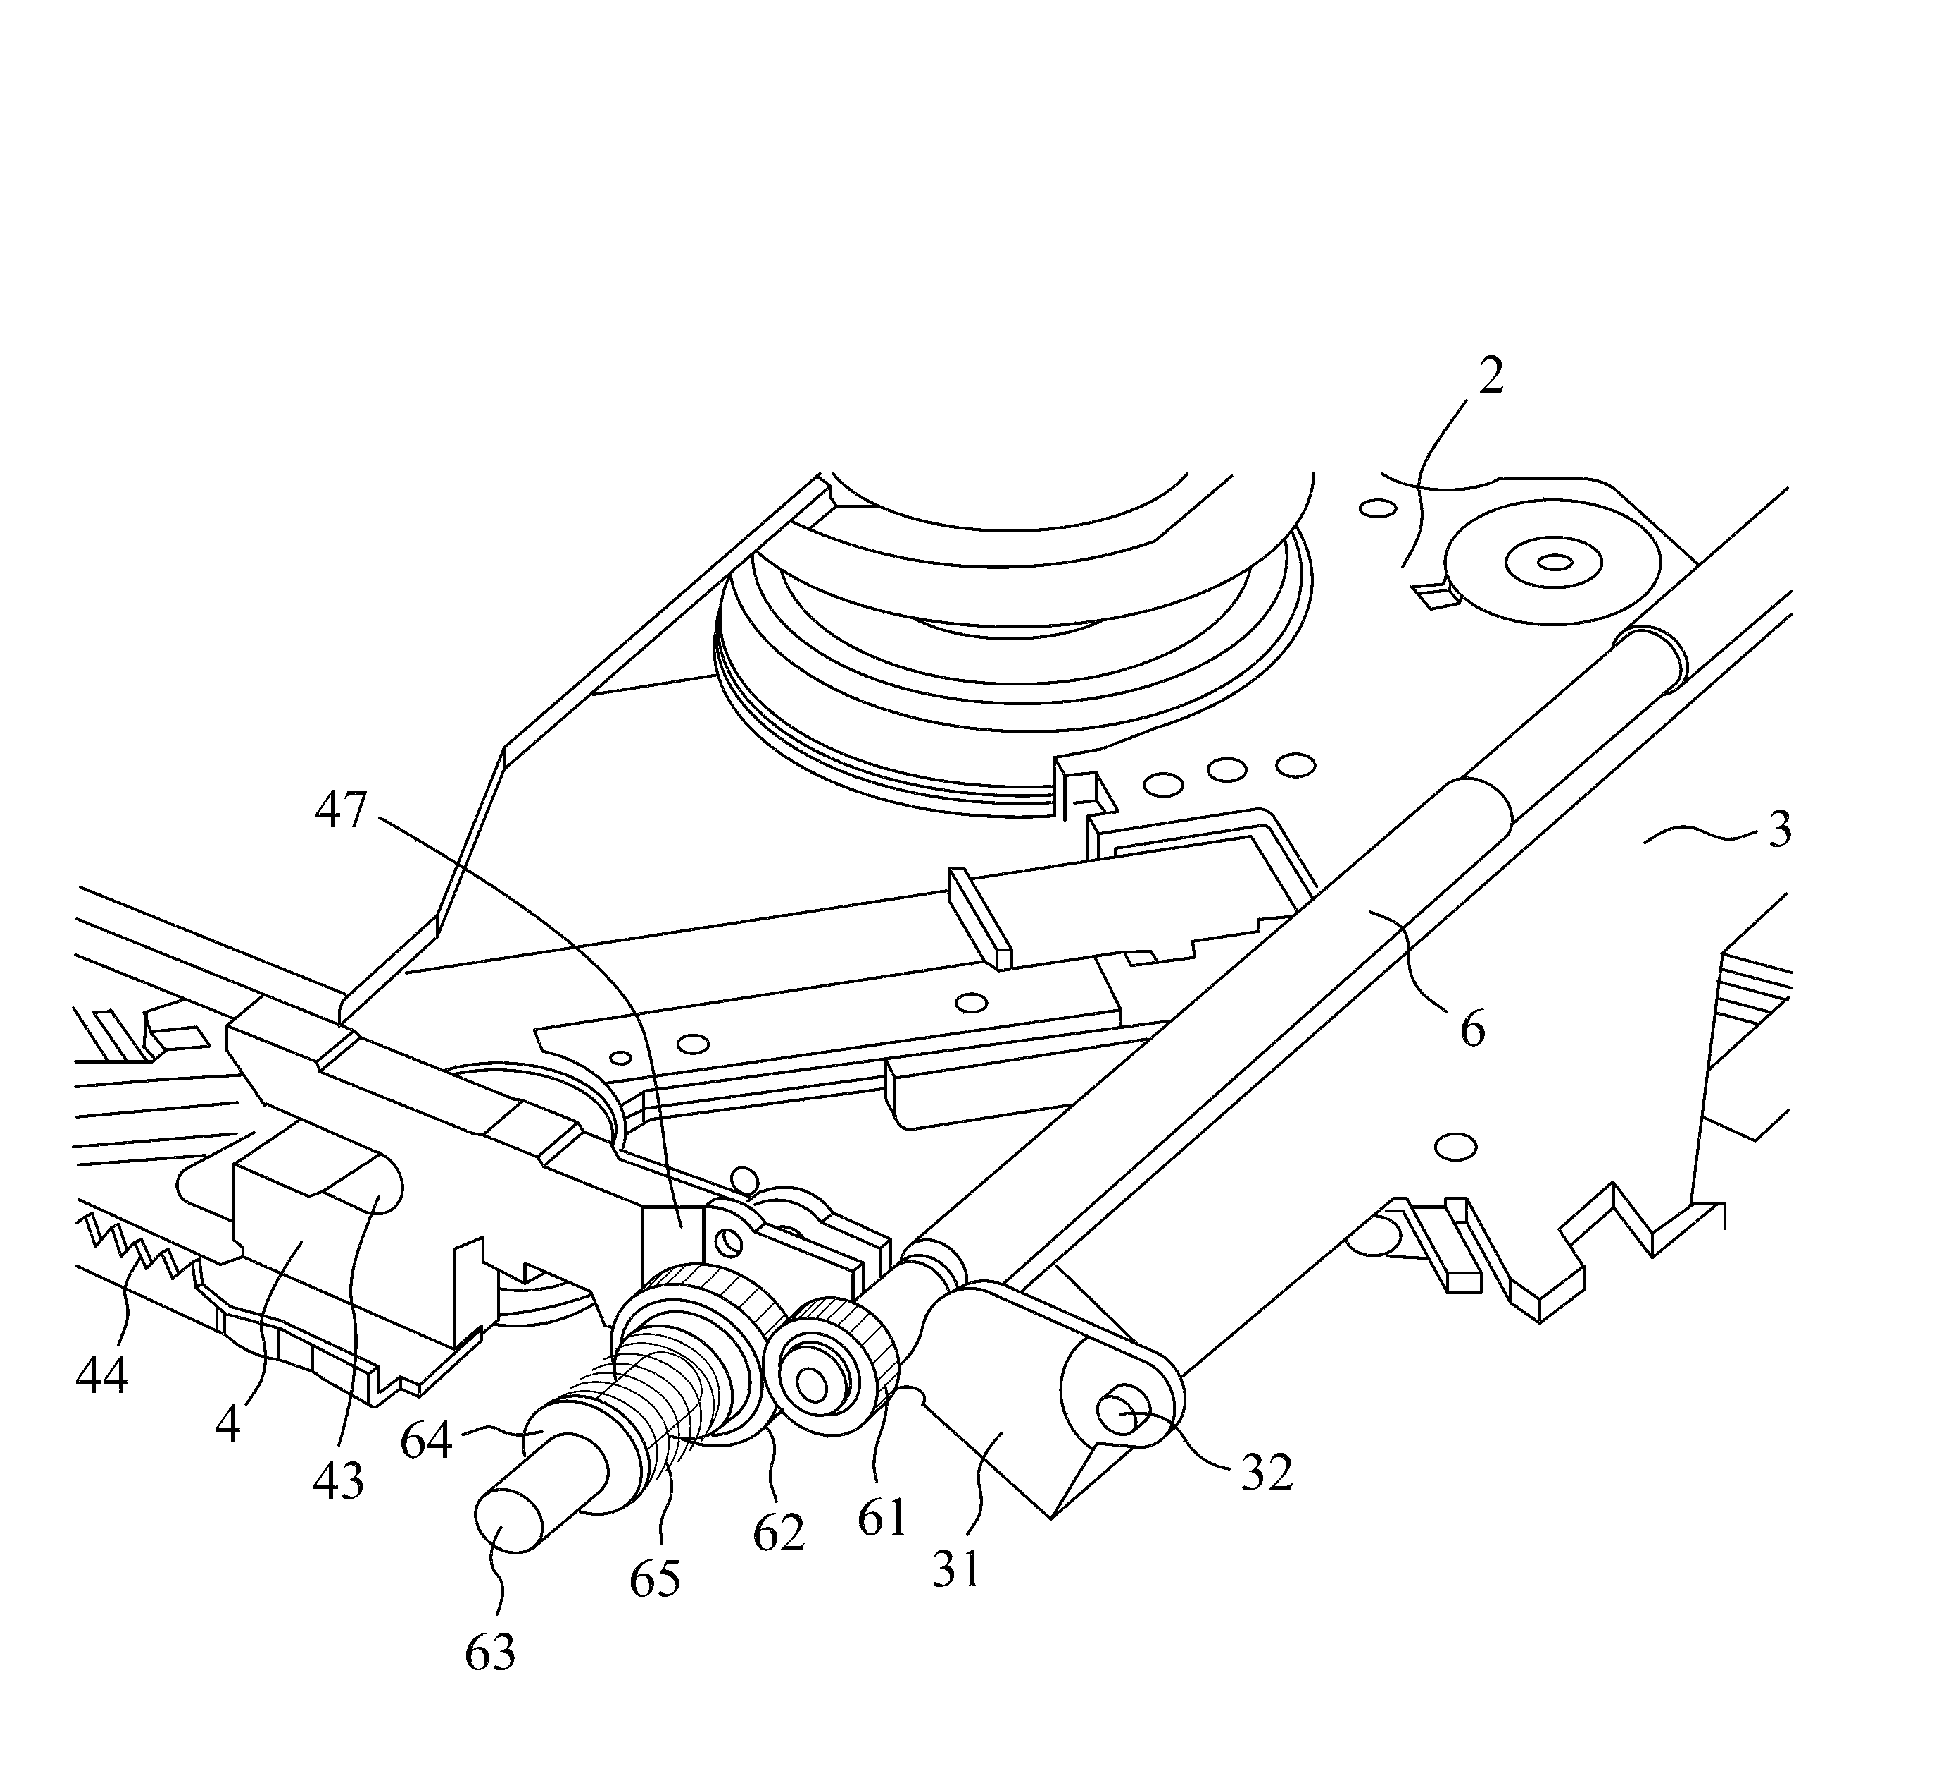 Disk device for loading and unloading a disk with a conveyance roller